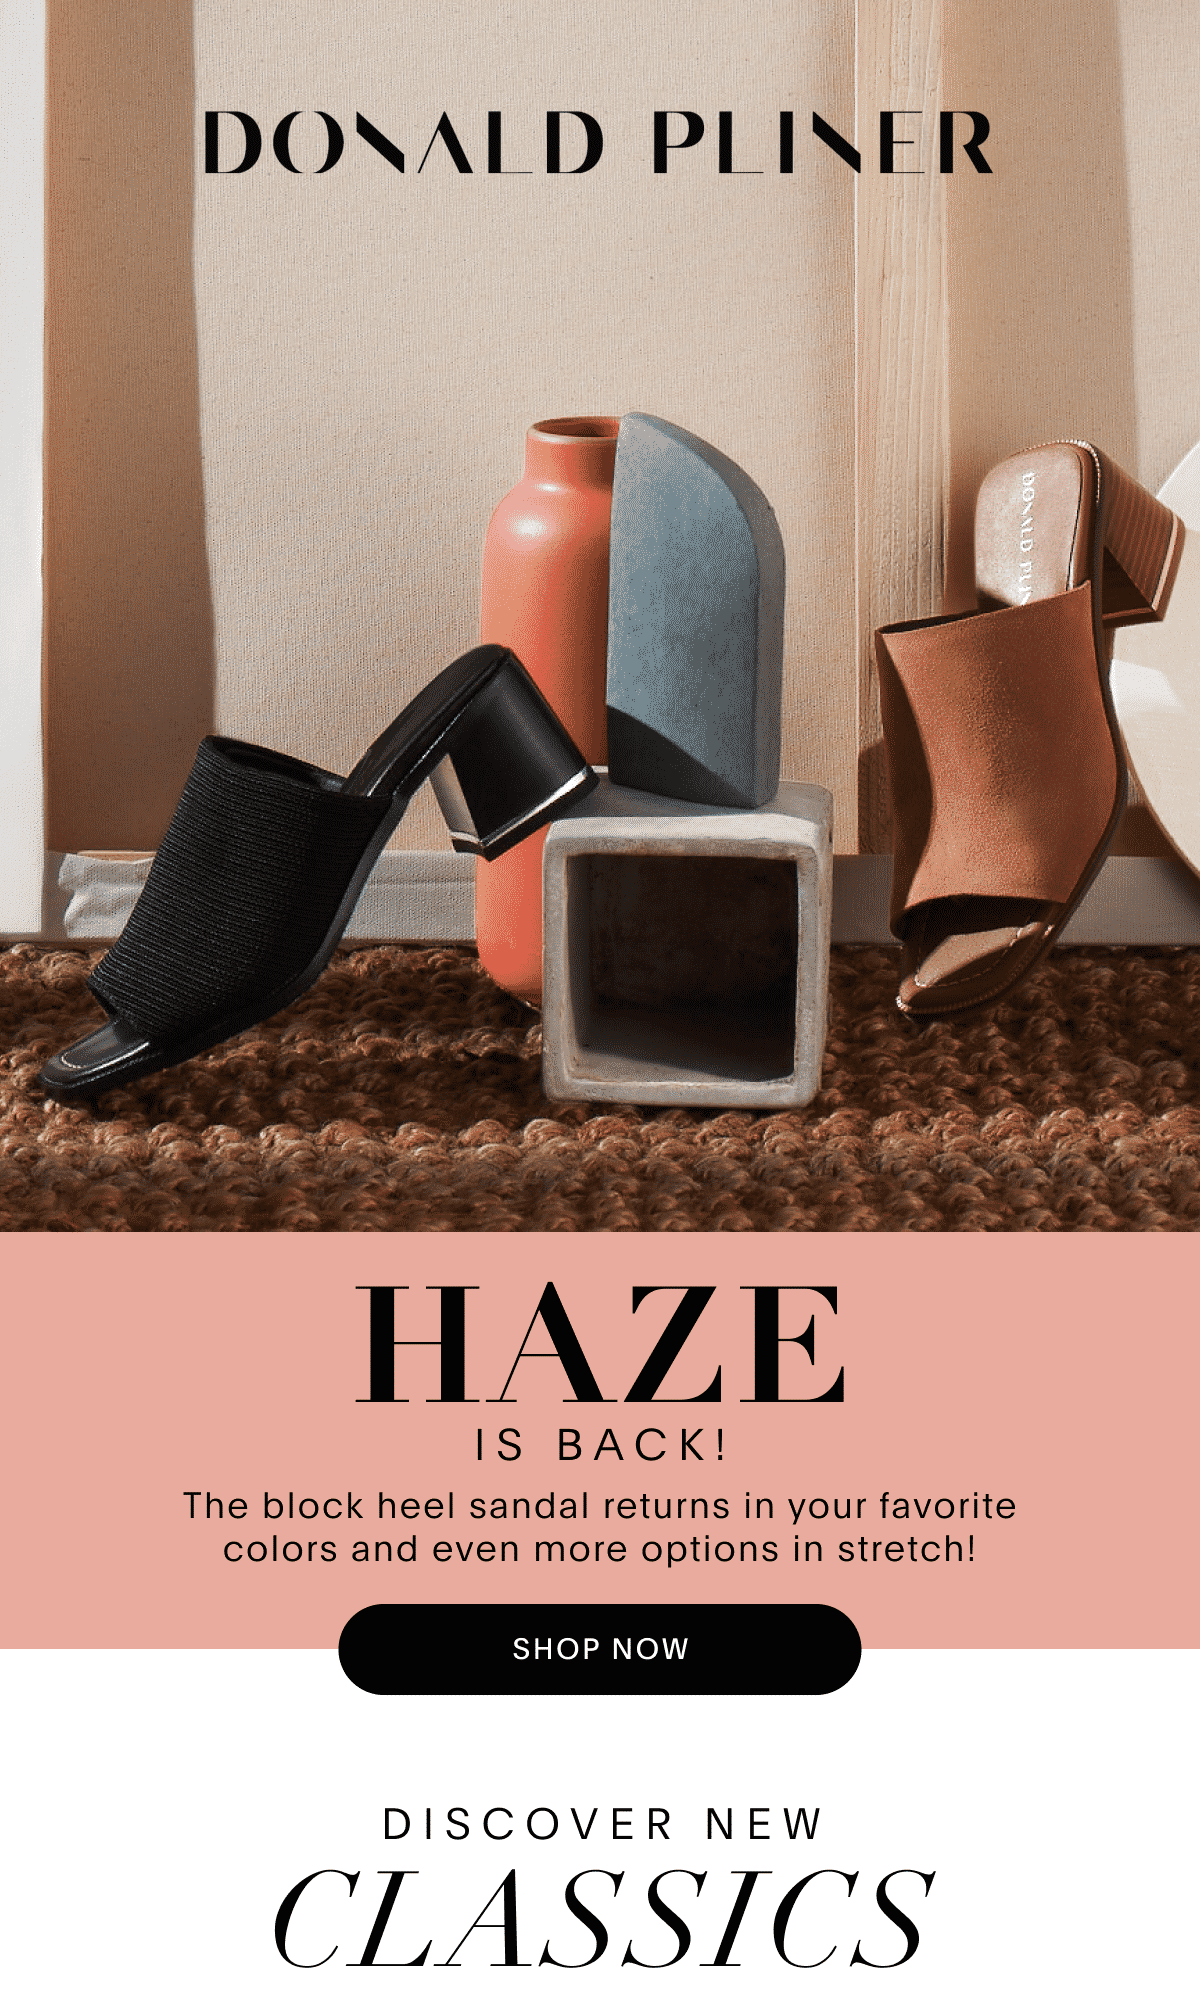 HAZE is back! The block heel sandal returns in your favorite colors and even more options in stretch